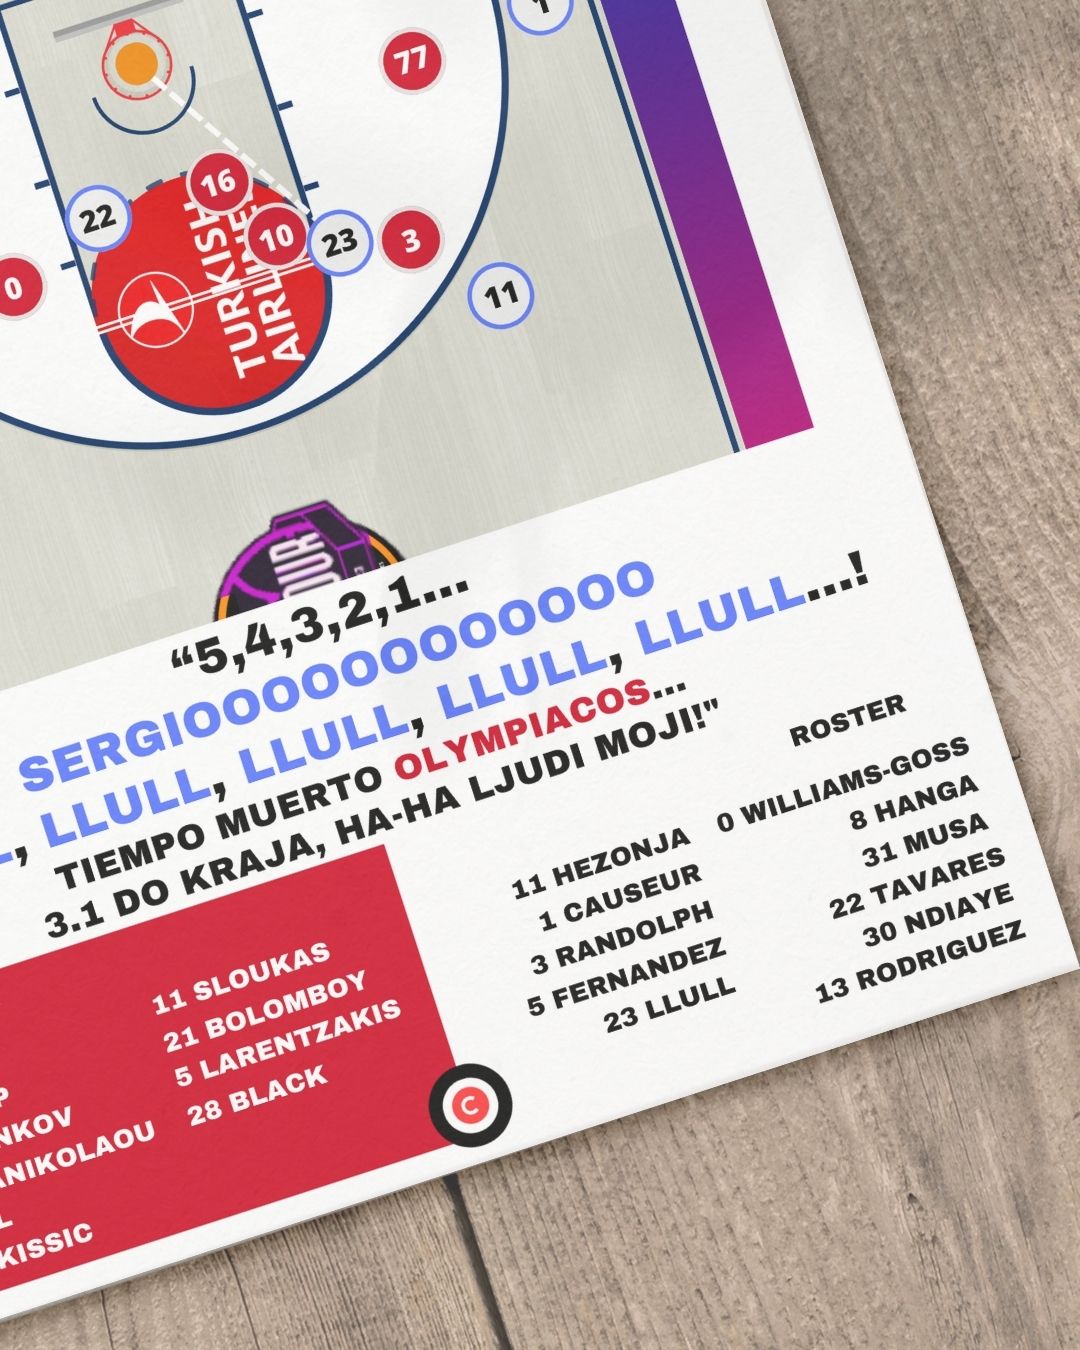 Sergio Llull vs Olympiacos BC - Euroleague 22/23 Final - Real Madrid - Premium  from CatenaccioDesigns - Just €14.50! Shop now at CatenaccioDesigns